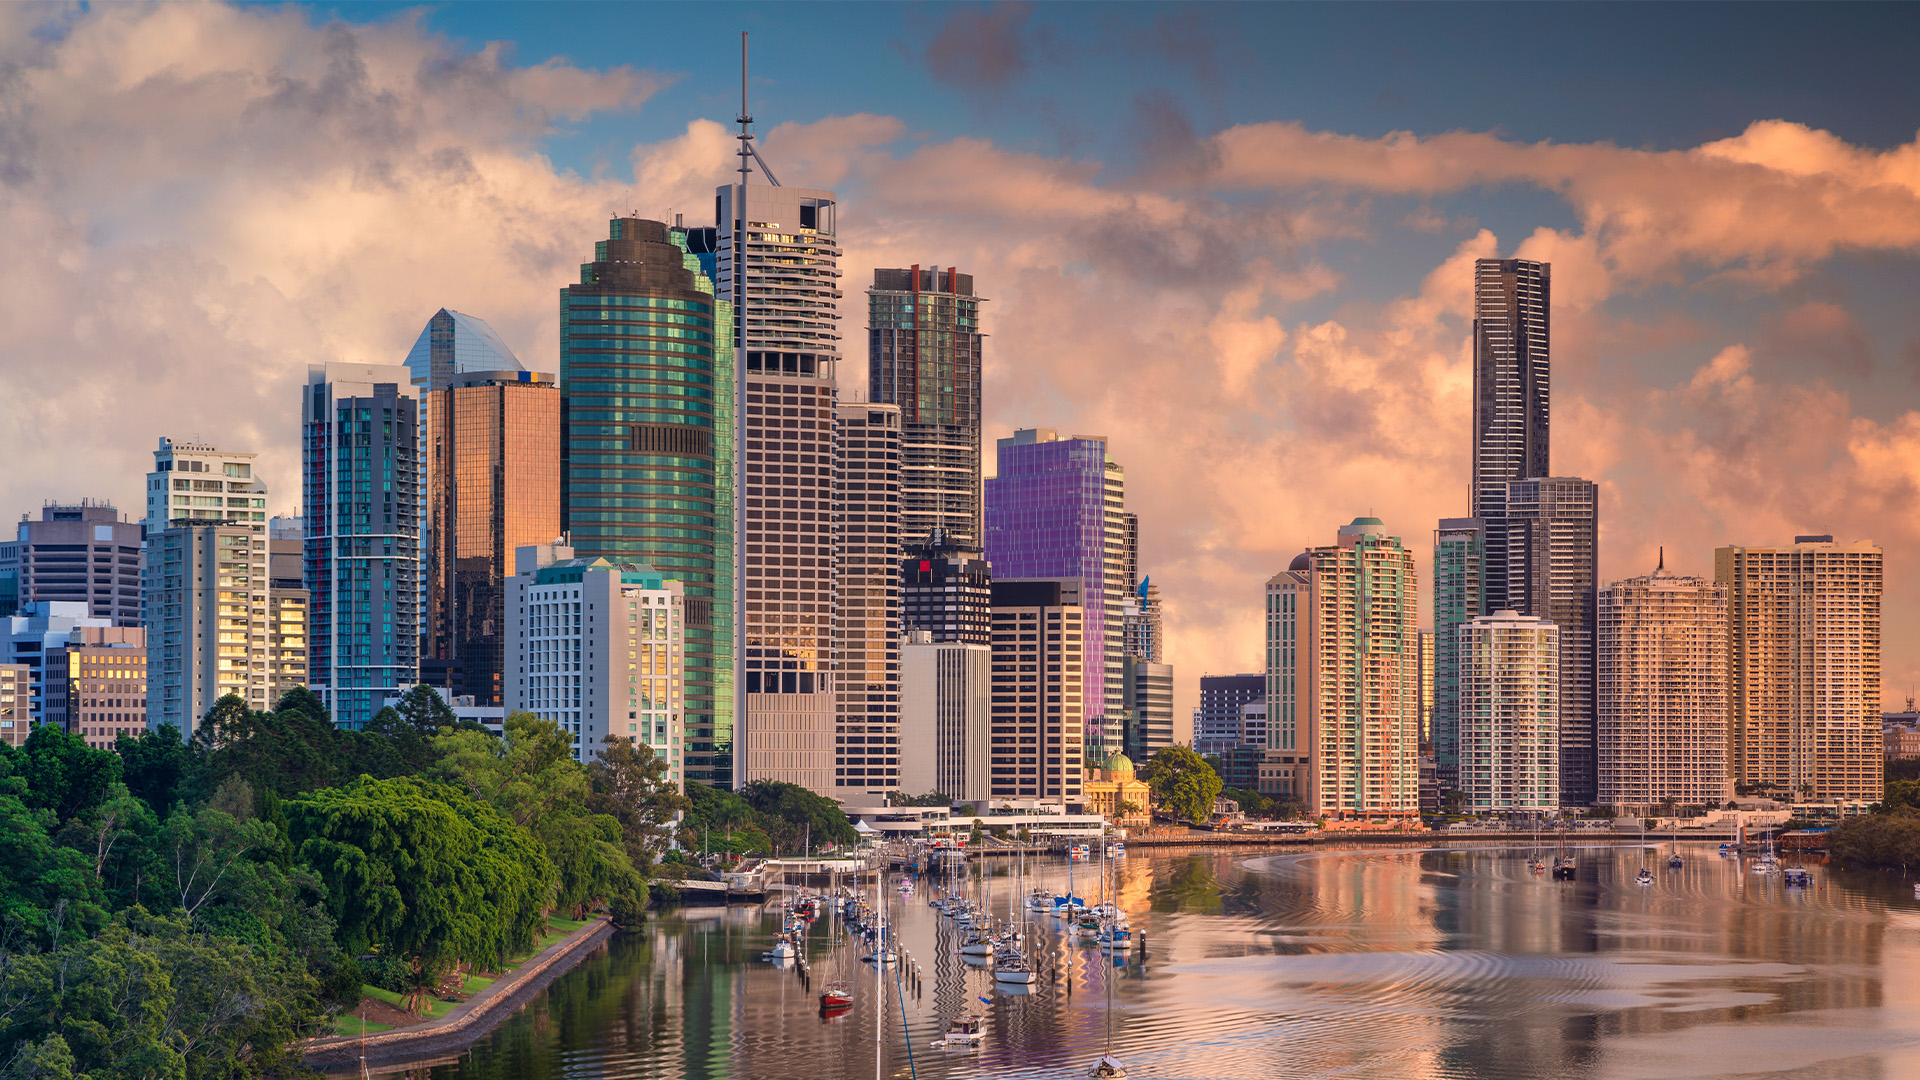 Queensland series: Applying the obligation to act as a model litigant